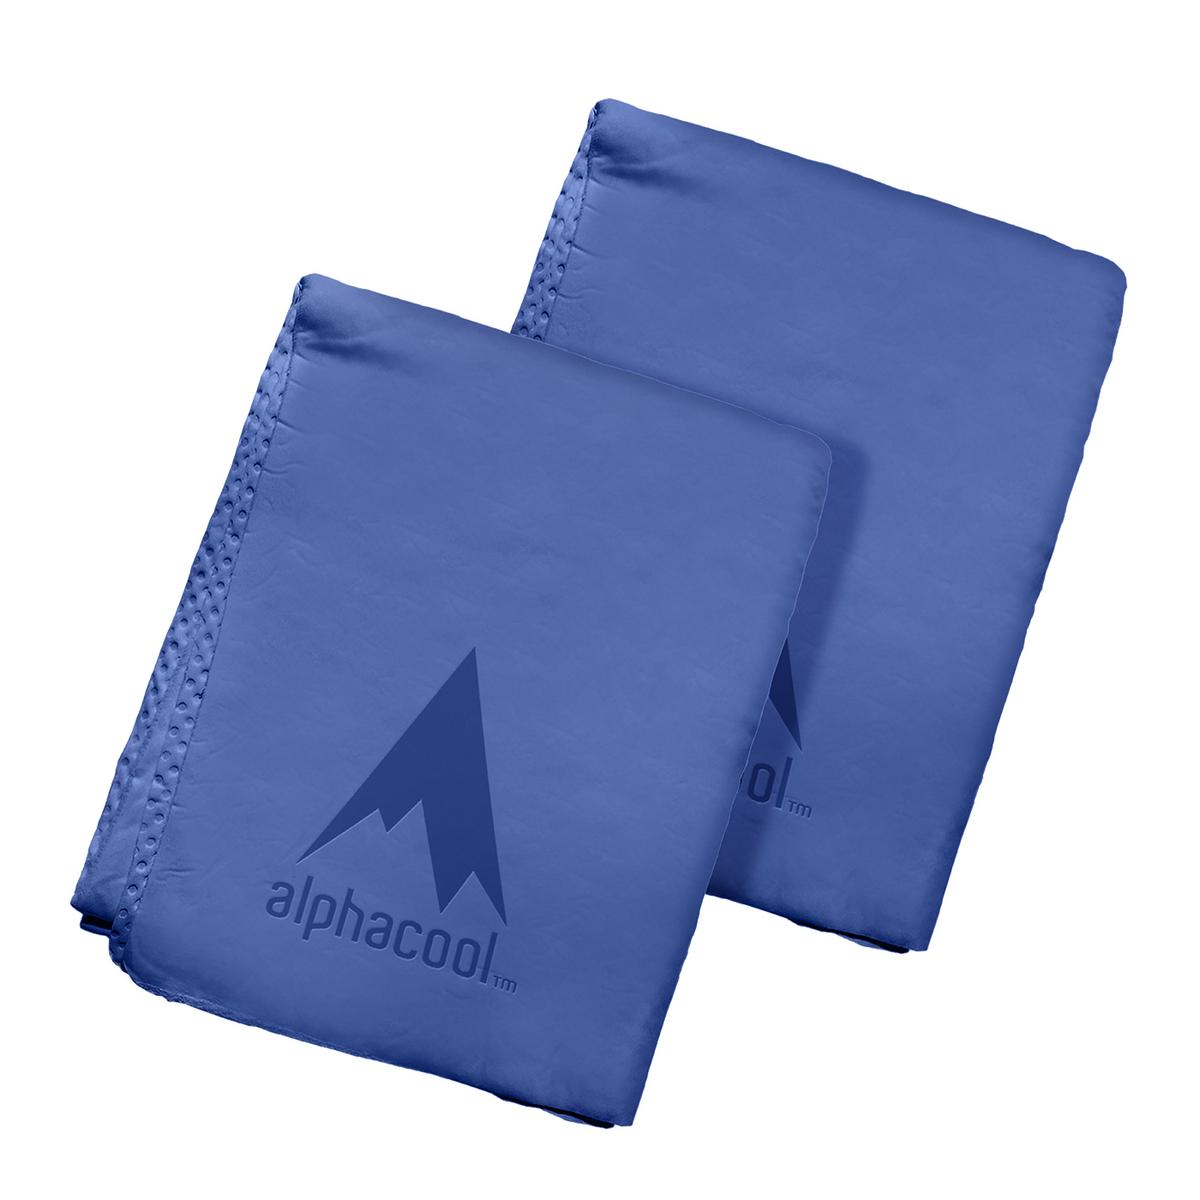 AlphaCool PVA Instant Cooling Towel (2-Pack) - Cooling